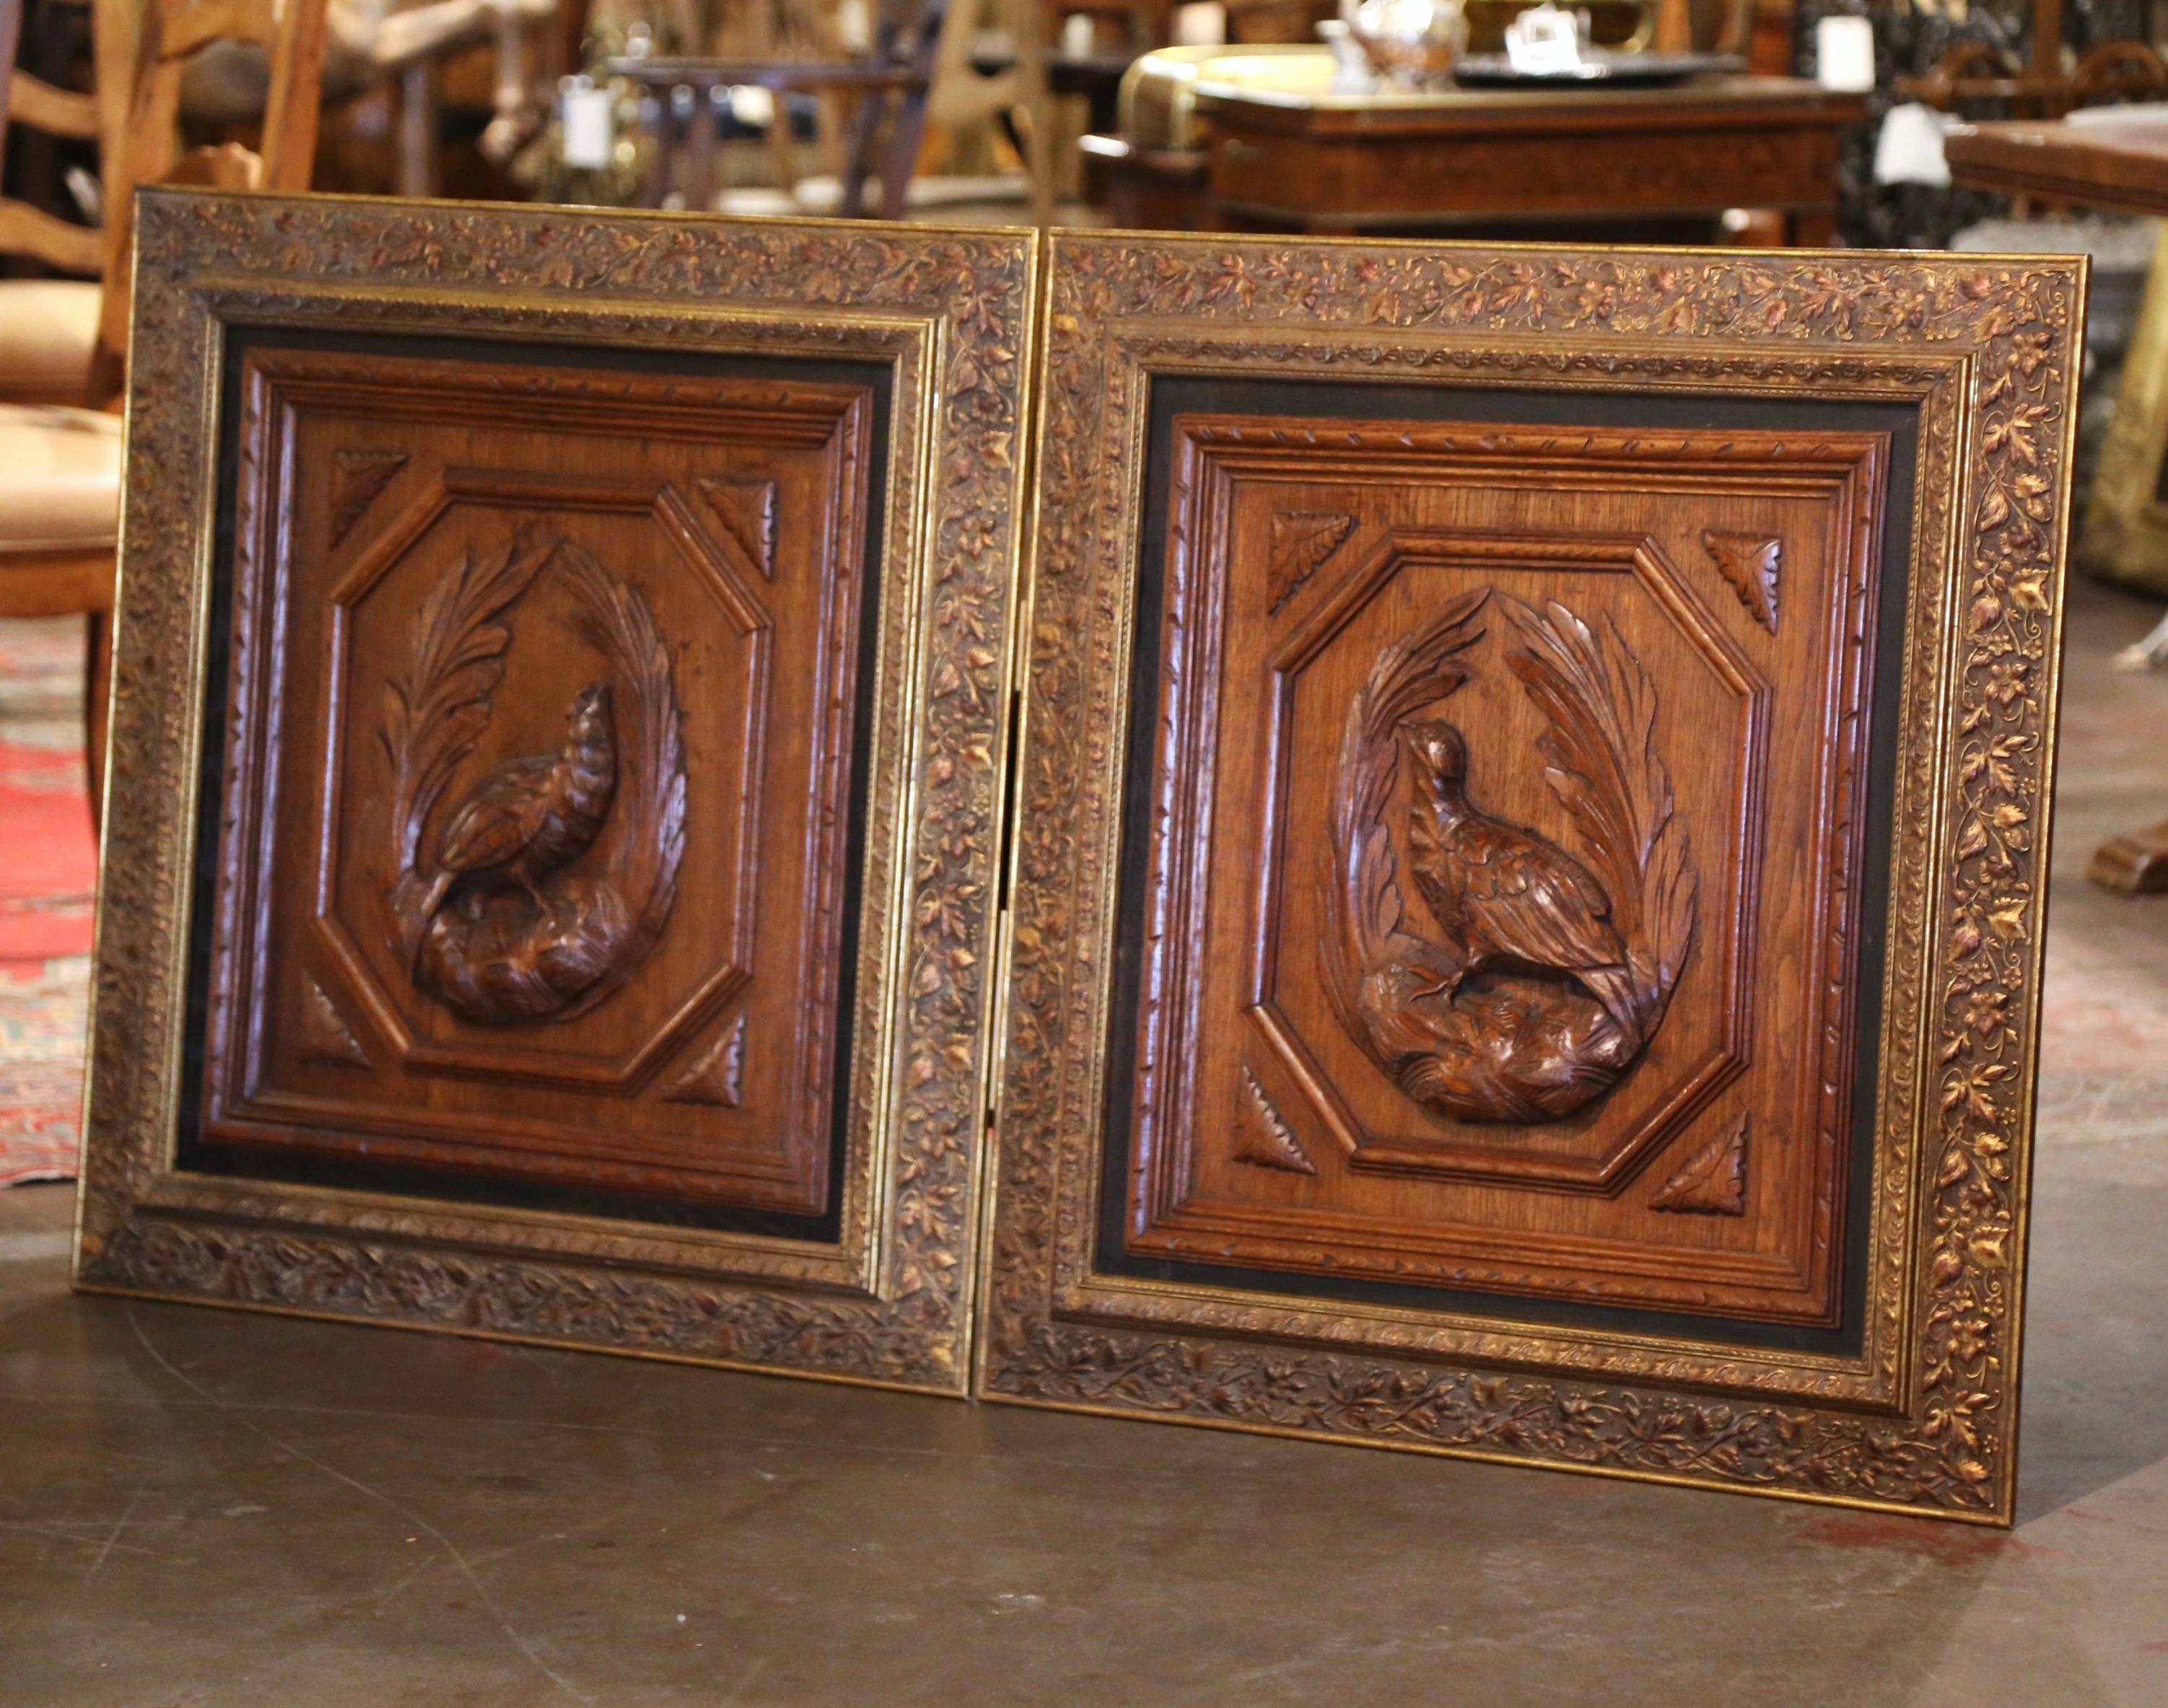 Pair of 19th Century French Carved Oak Wall Panels with Pheasants in Gilt Frames In Excellent Condition For Sale In Dallas, TX